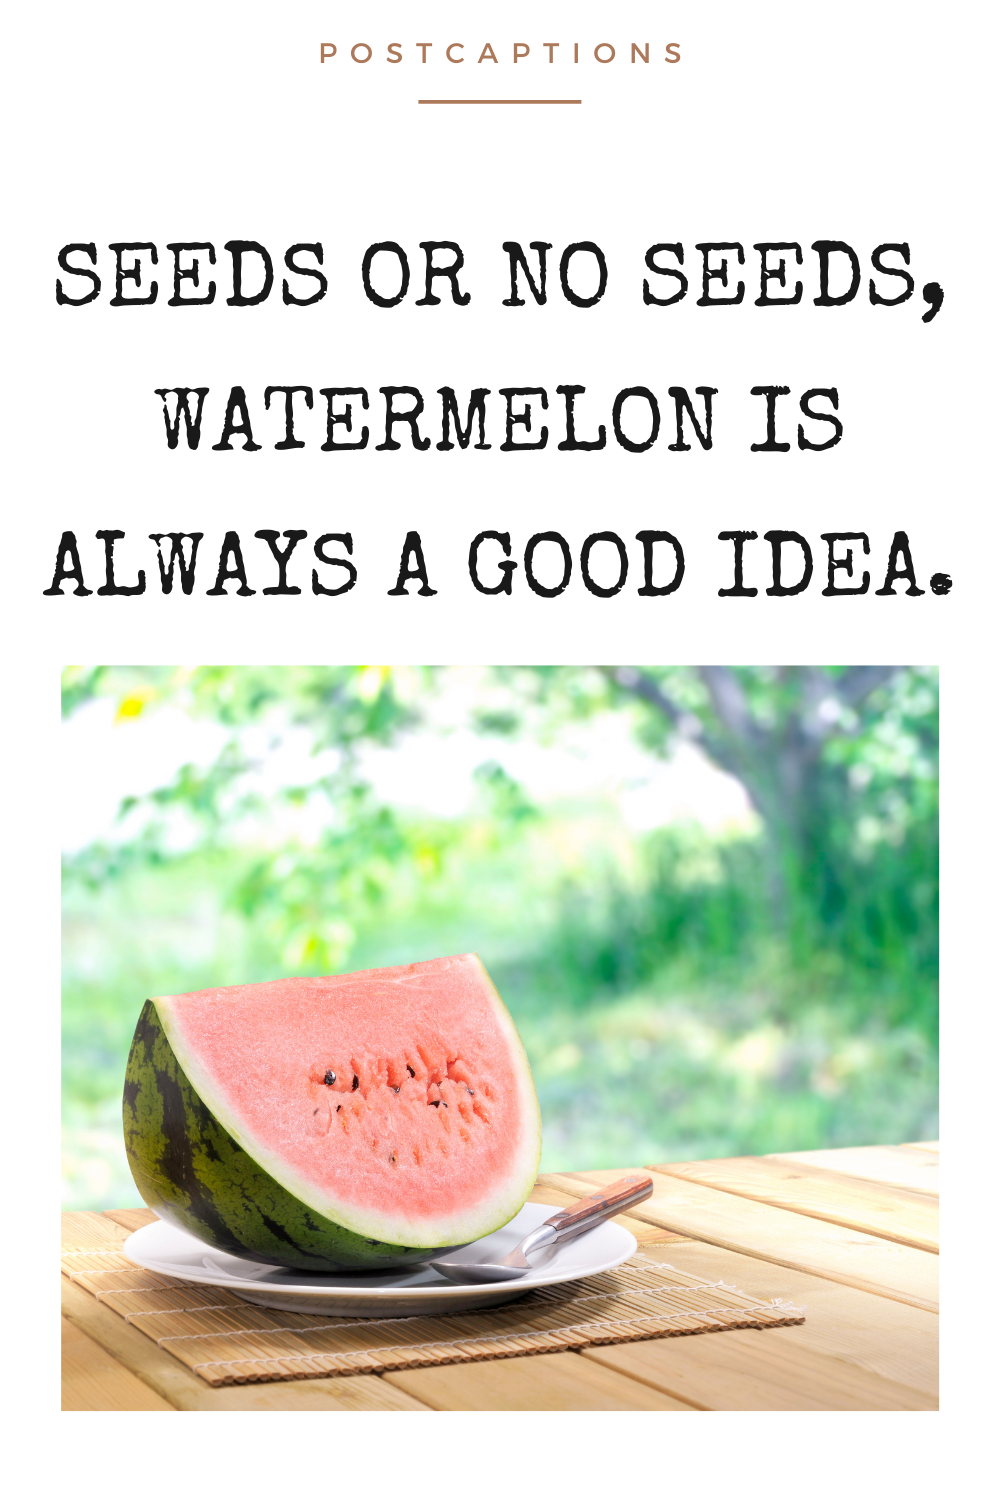 75 Watermelon Captions for Instagram 